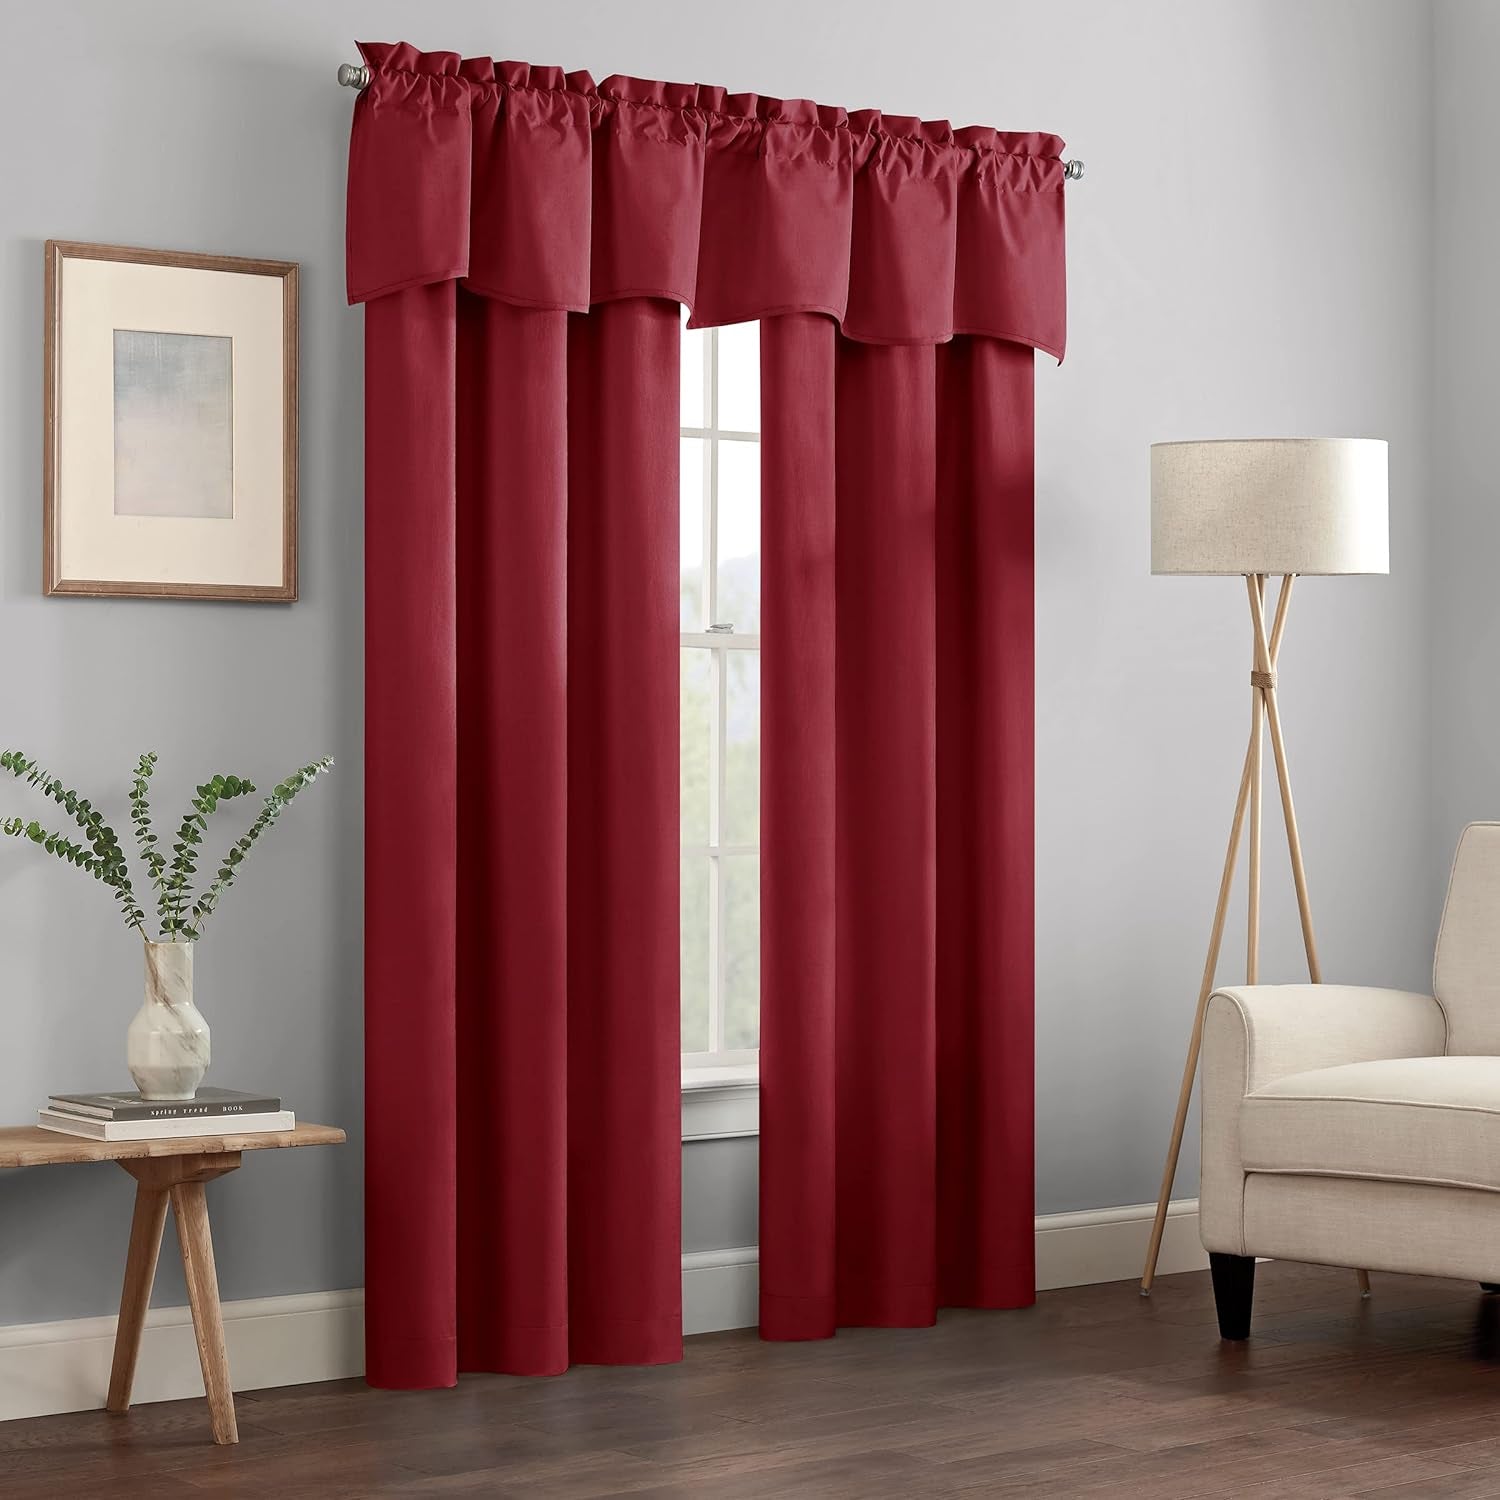 Eclipse Kendall Modern Scalloped Valance Rod Pocket Window Curtain for Kitchen or Bathroom, 42 in X 18 In, Ruby